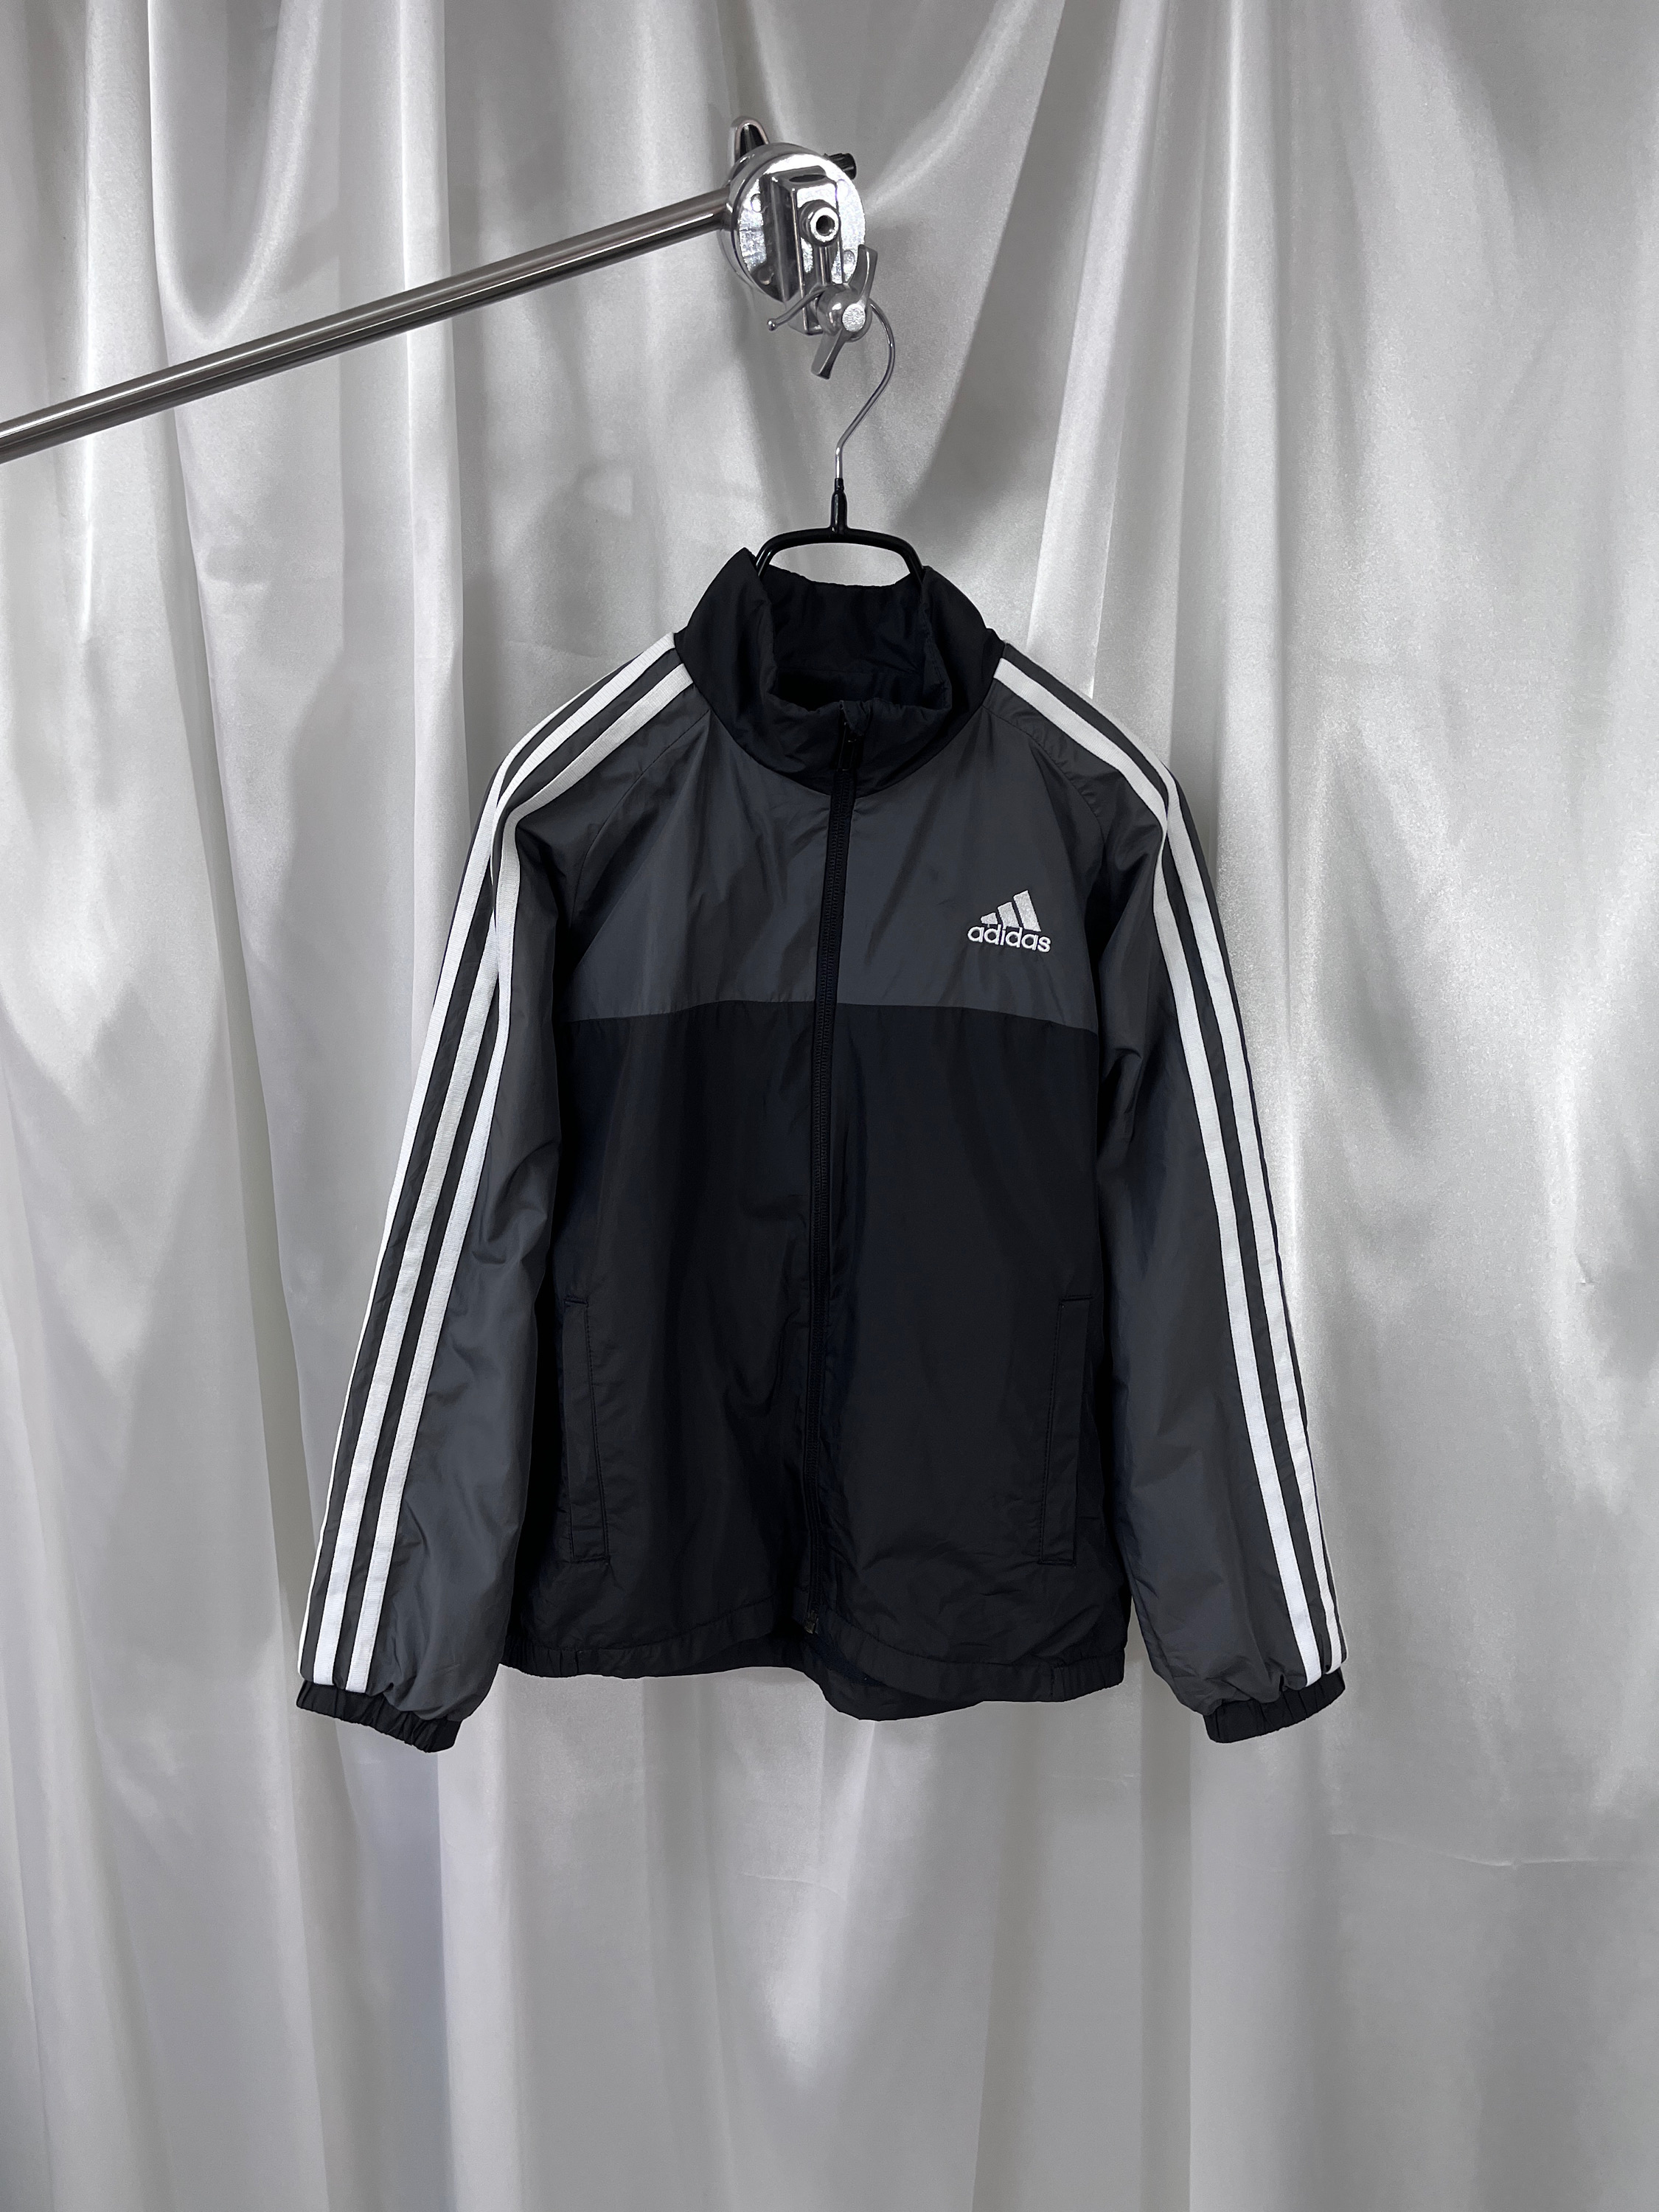 adidas zip-up for kids